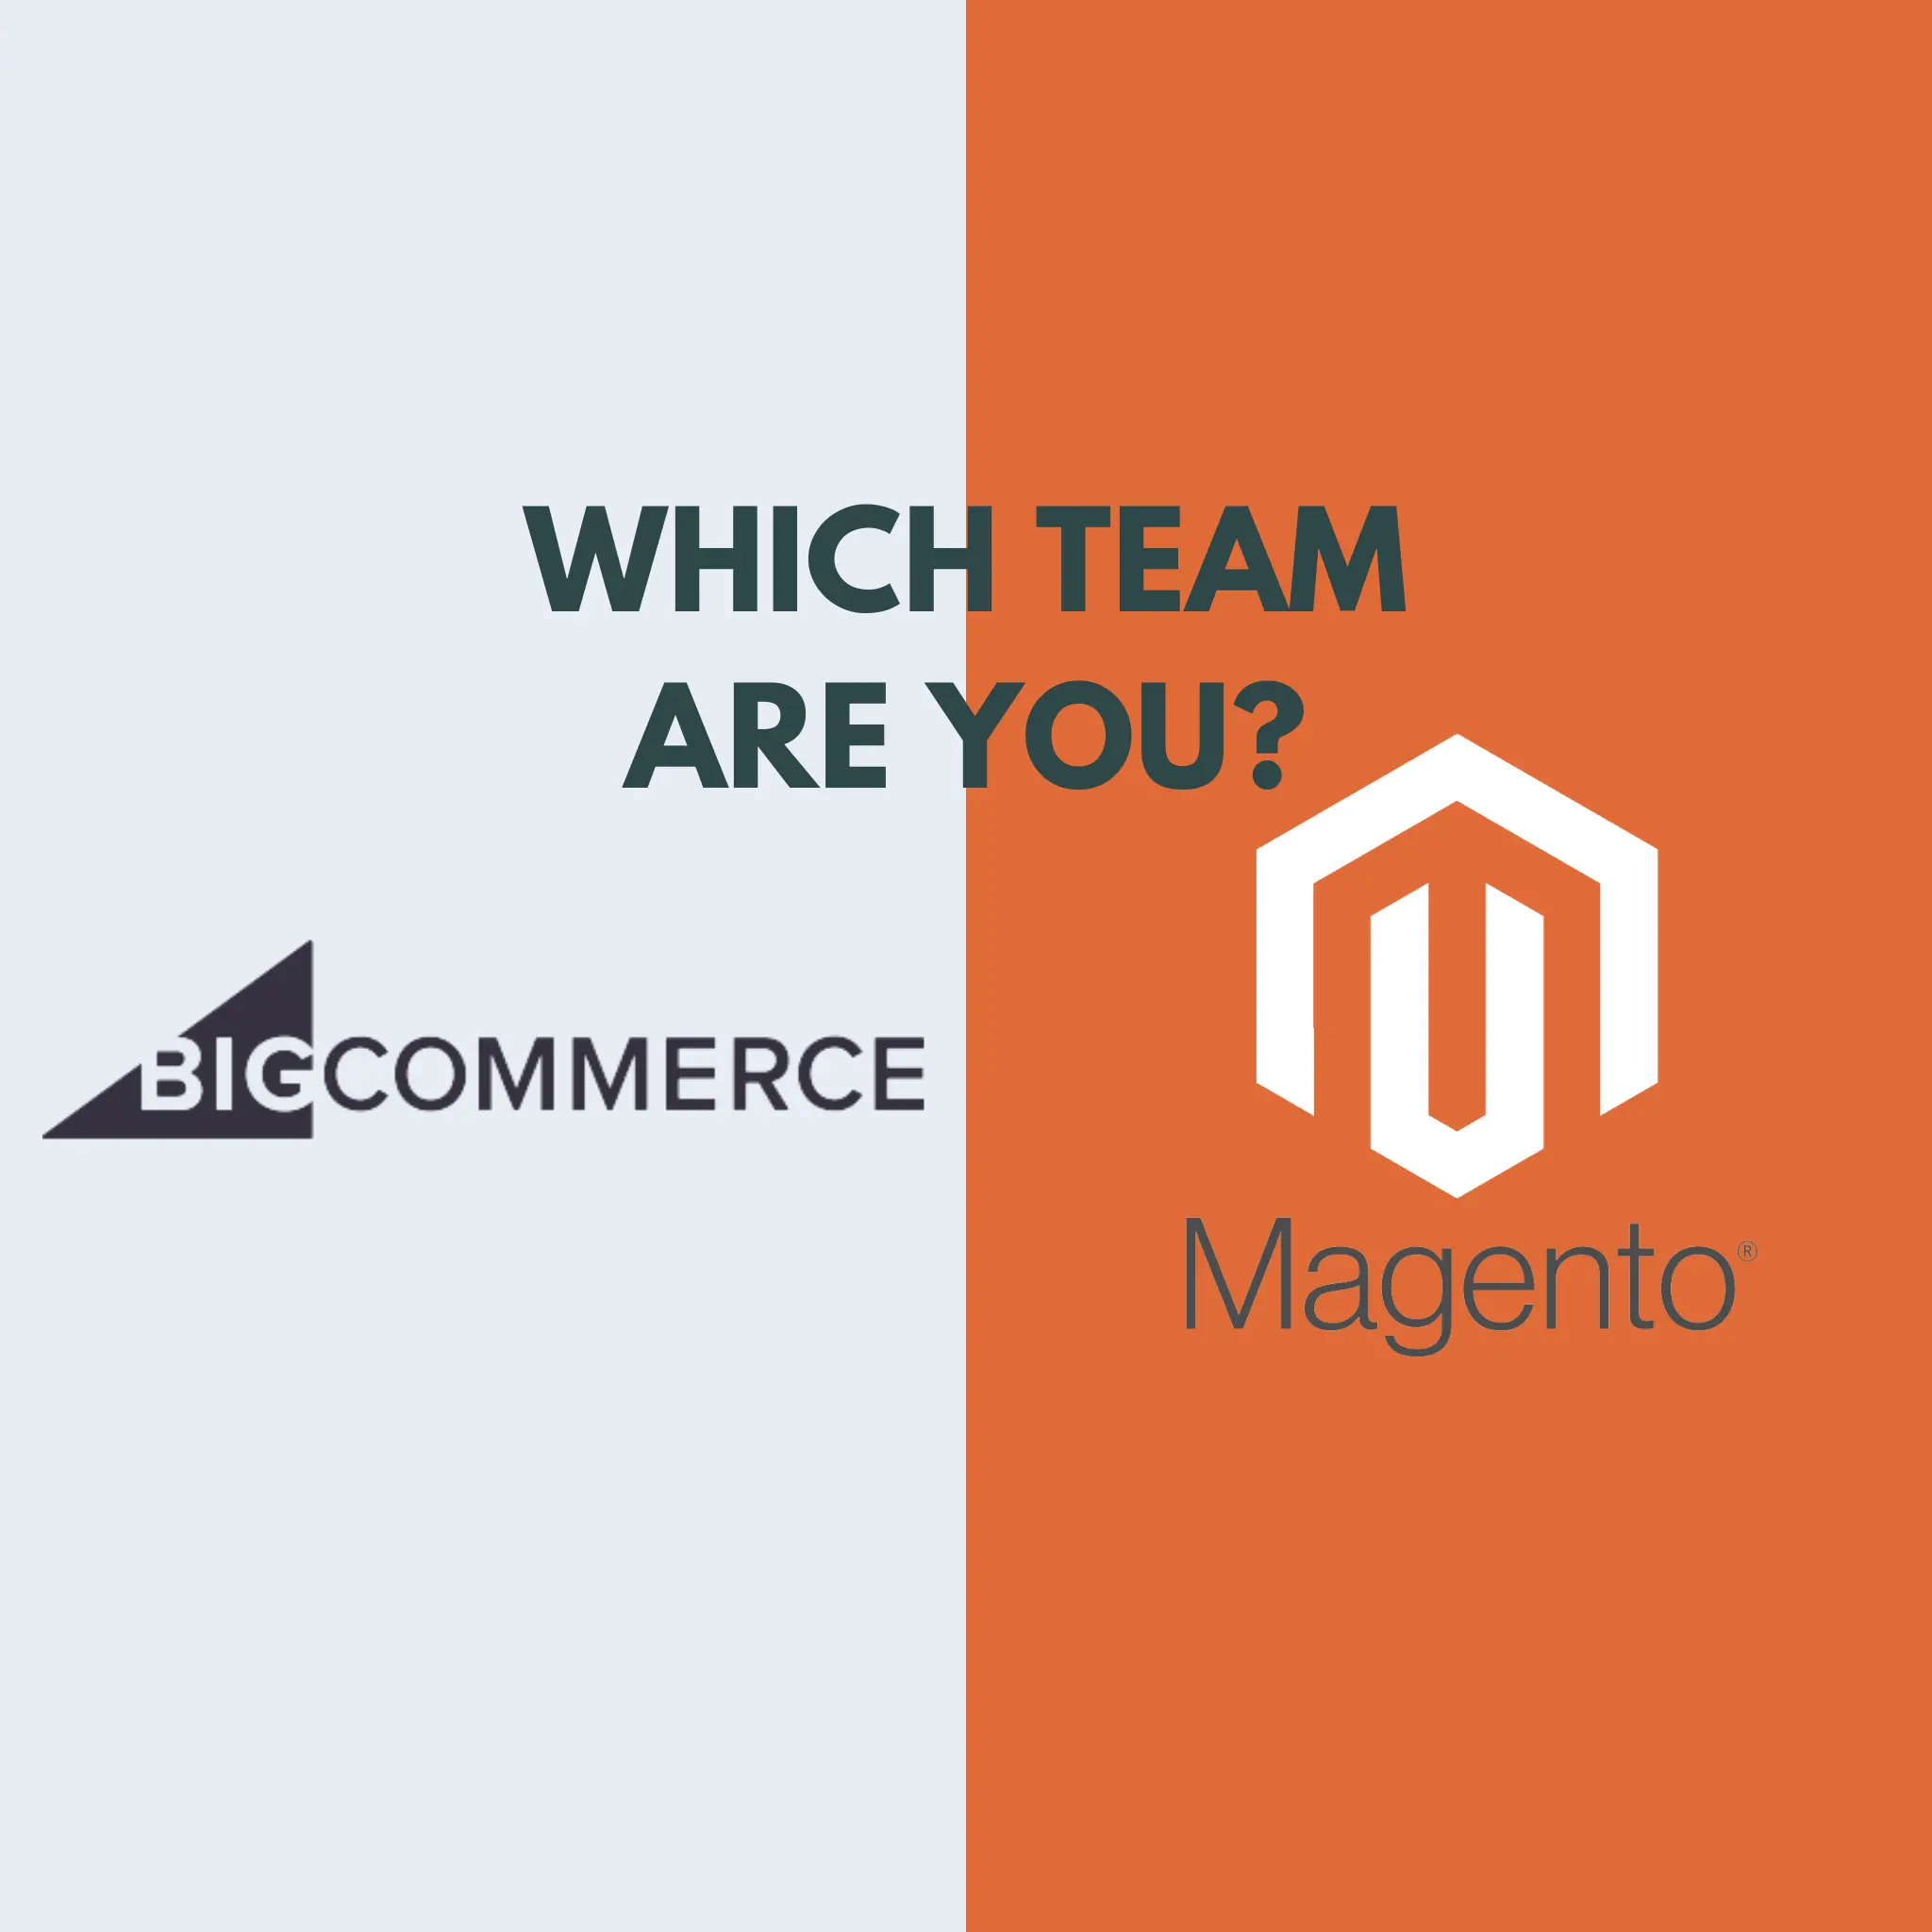 BigCommerce vs Magento: Comparing Two Top Ecommerce Platforms - Which is the Best Choice for Your Online Store? Feature Image